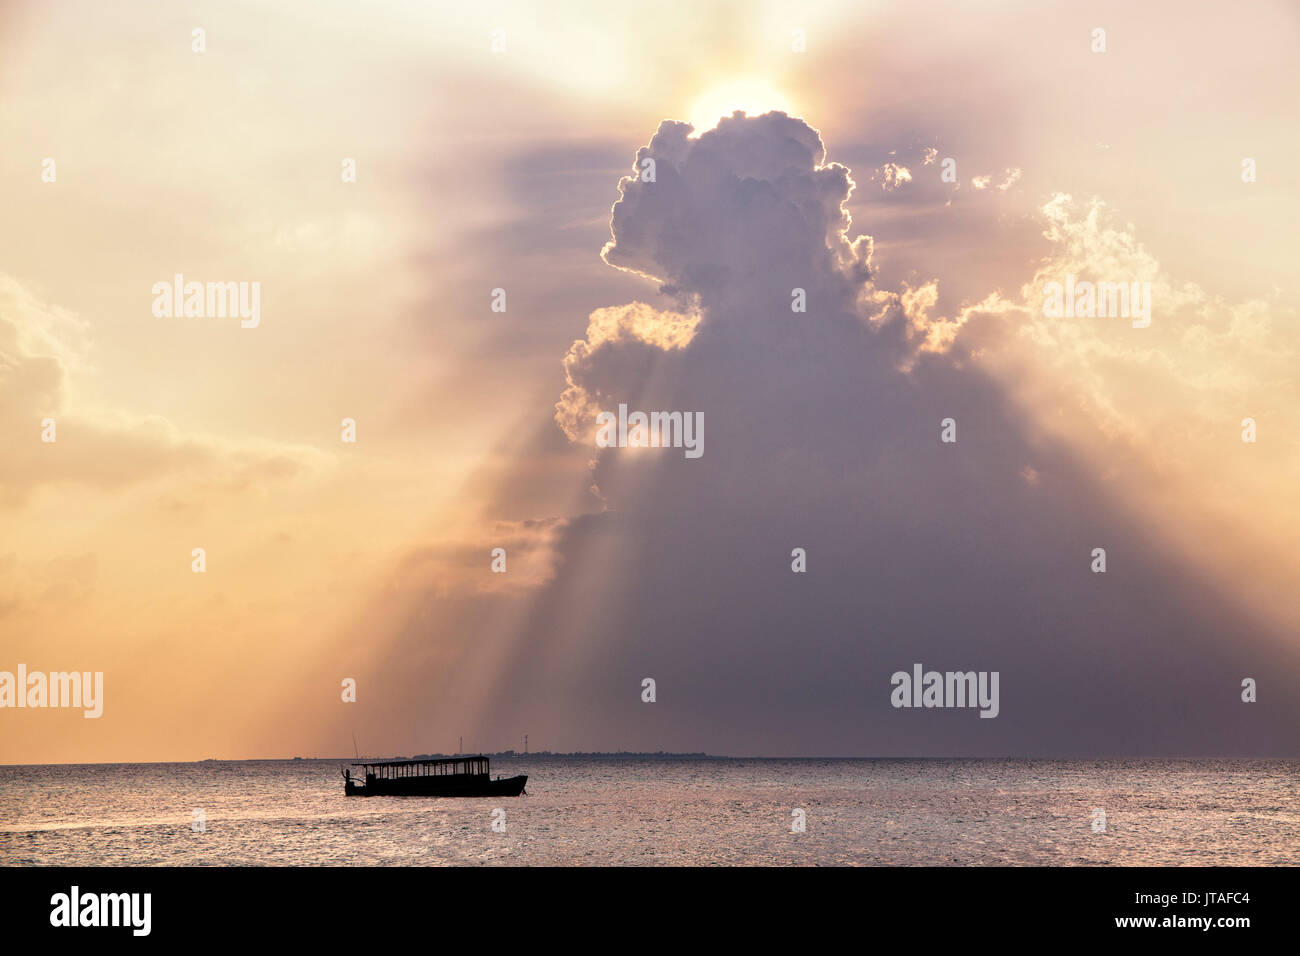 Dramatic cloud formations and boat in silhoutte at sunset, Dhuni Kolhu, Baa Atoll, Republic of Maldives, Indian Ocean, Asia Stock Photo